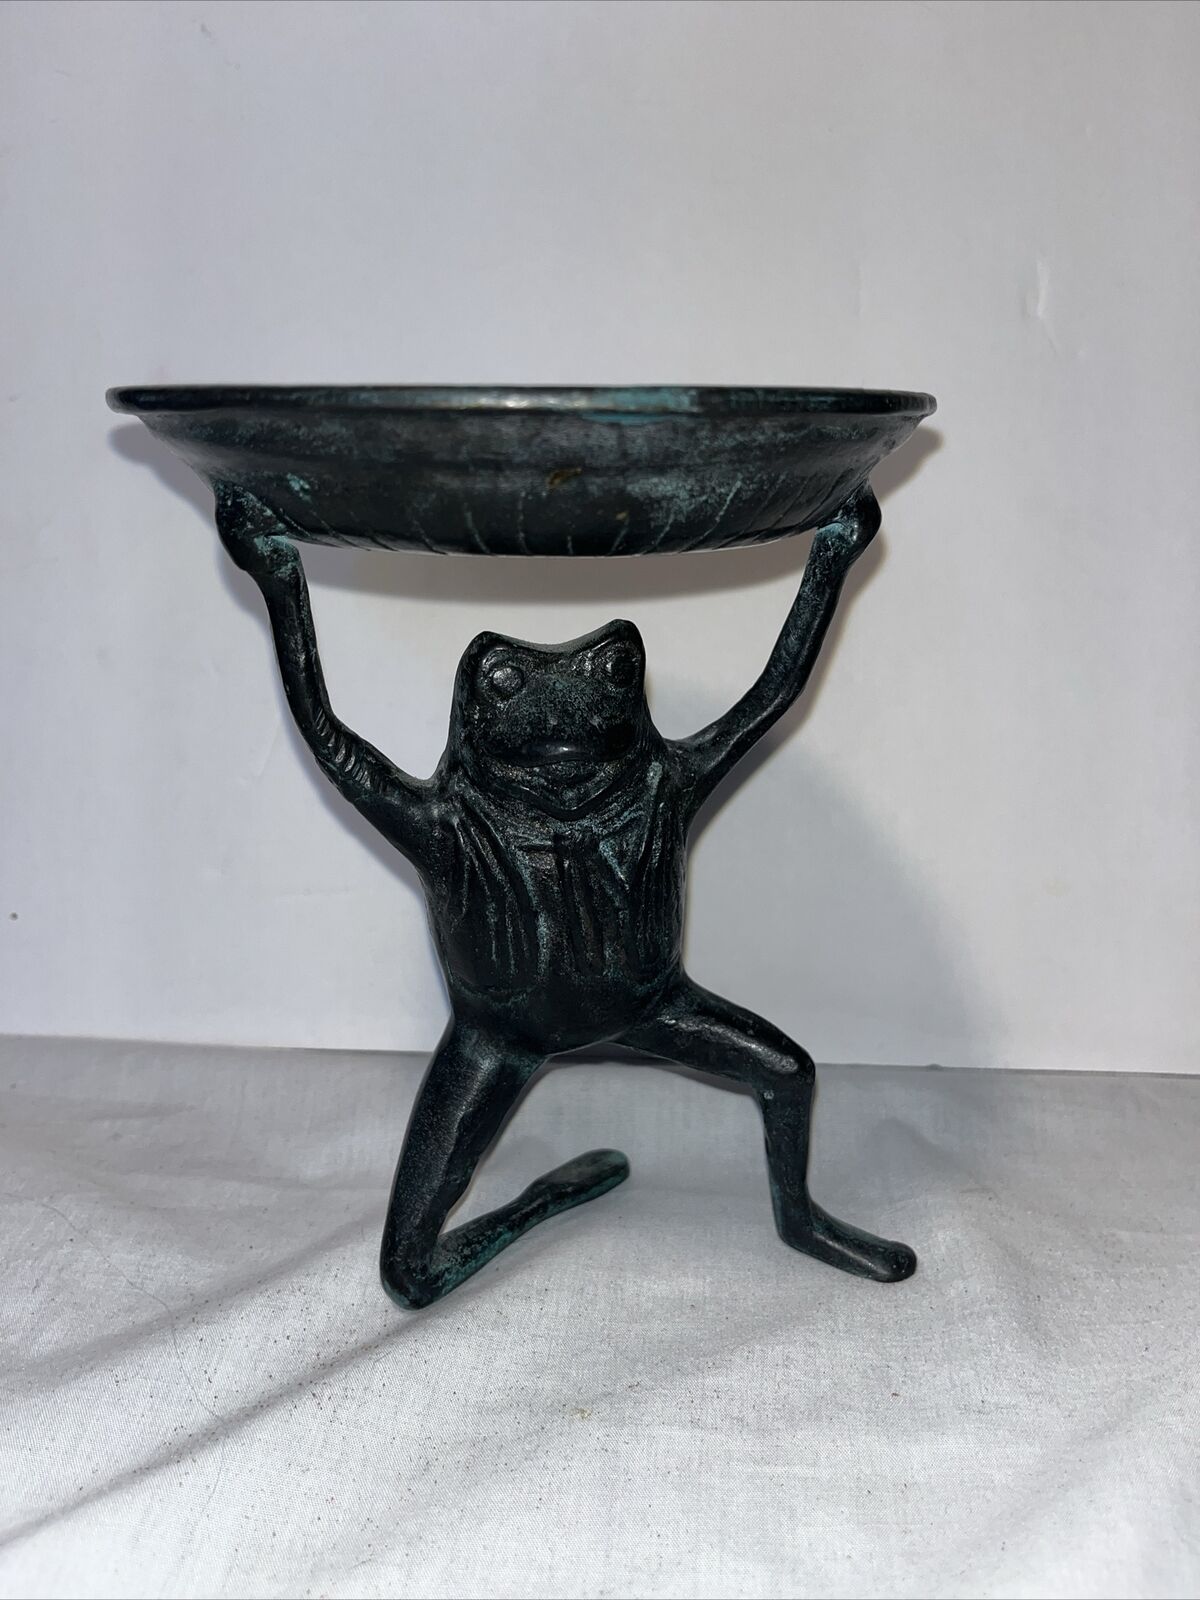 SPI Brass Verdi Gris Patina FROG Candle Holder on Lily Pad San Pacific 6”